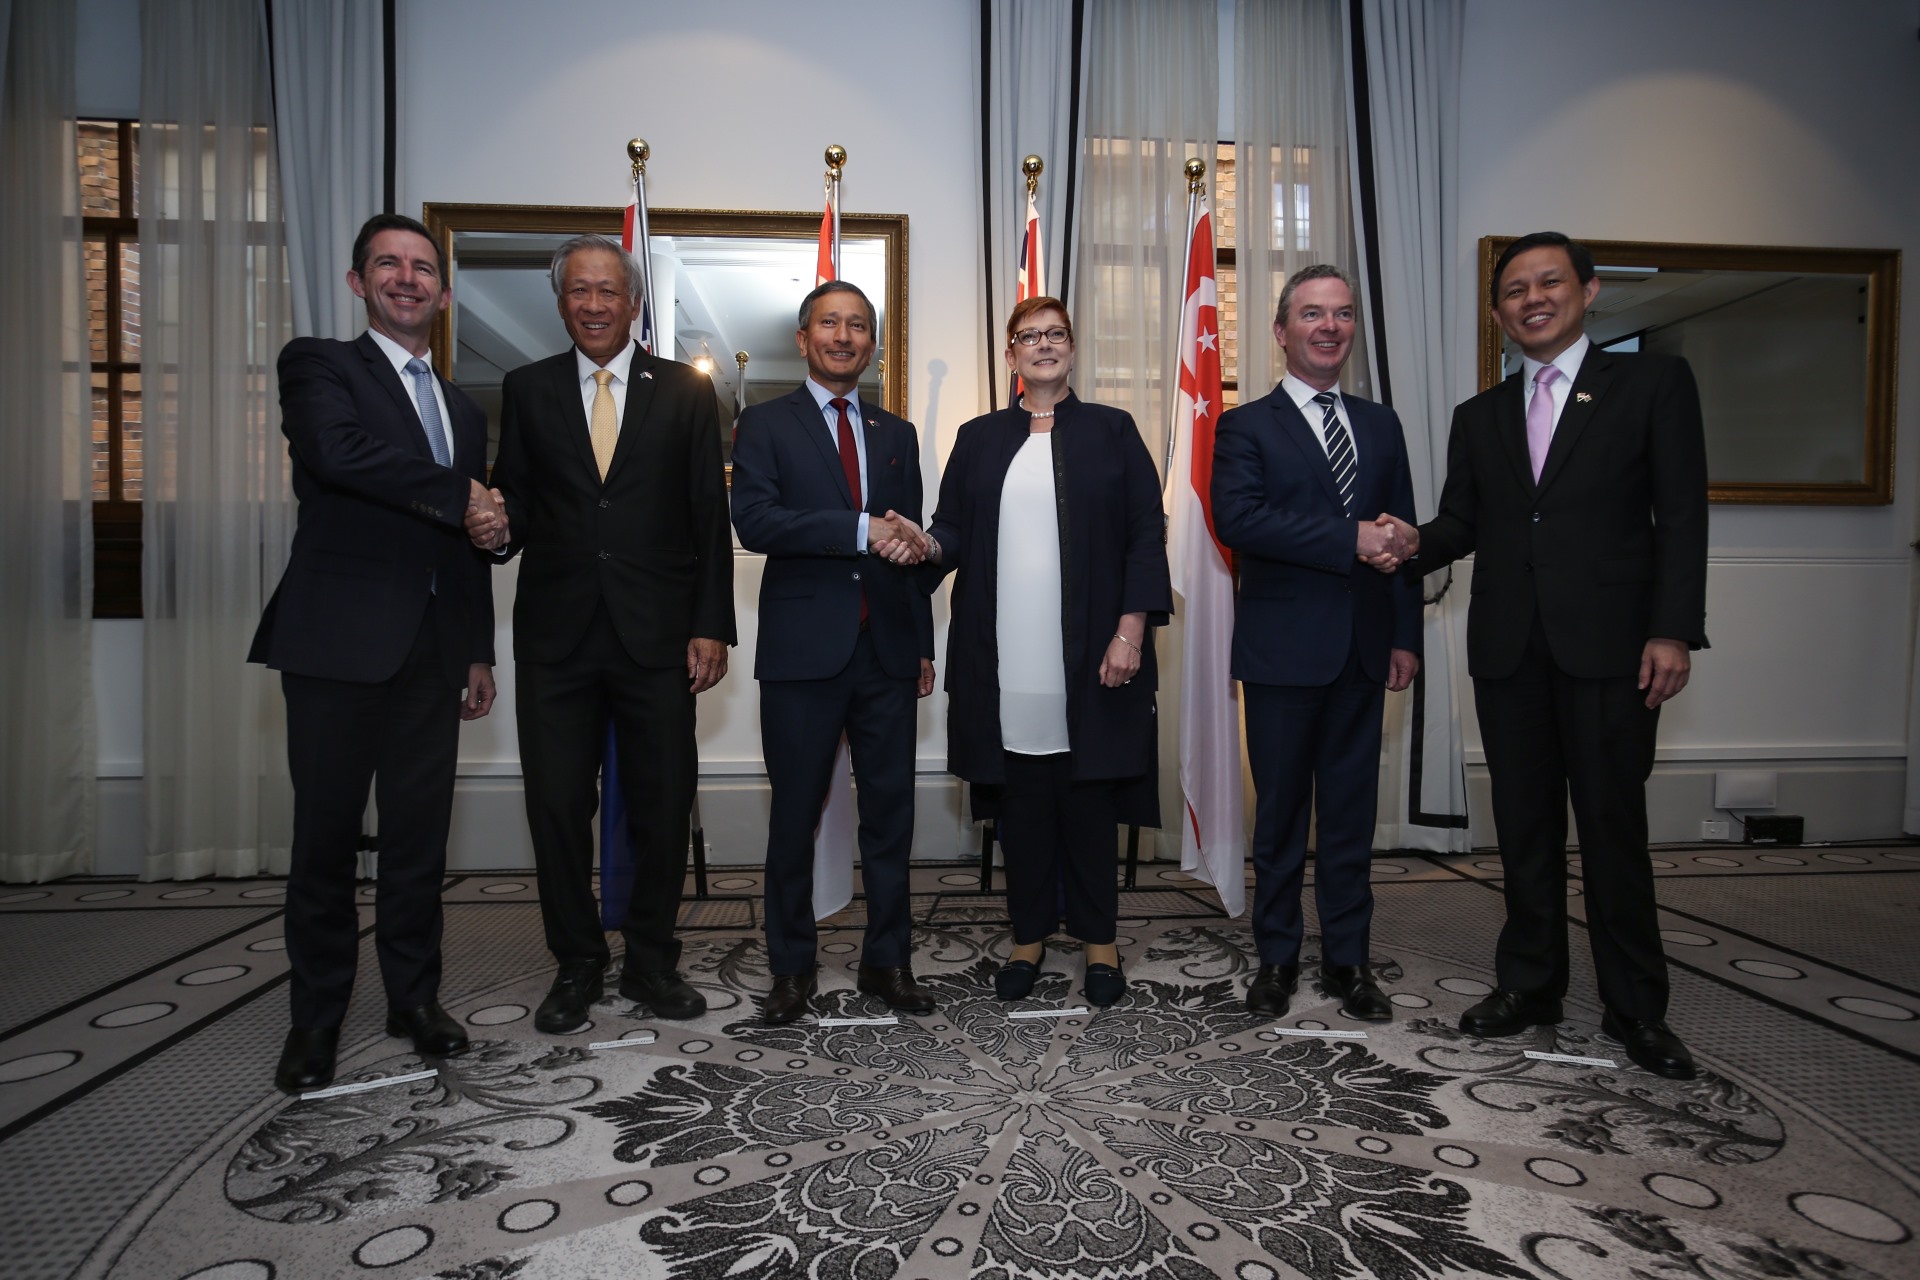 Minister for Defence Dr Ng Eng Hen, Minister for Foreign Affairs Dr Vivian Balakrishnan, and Minister for Trade and Industry Chan Chun Sing being welcomed by their Australian counterparts.